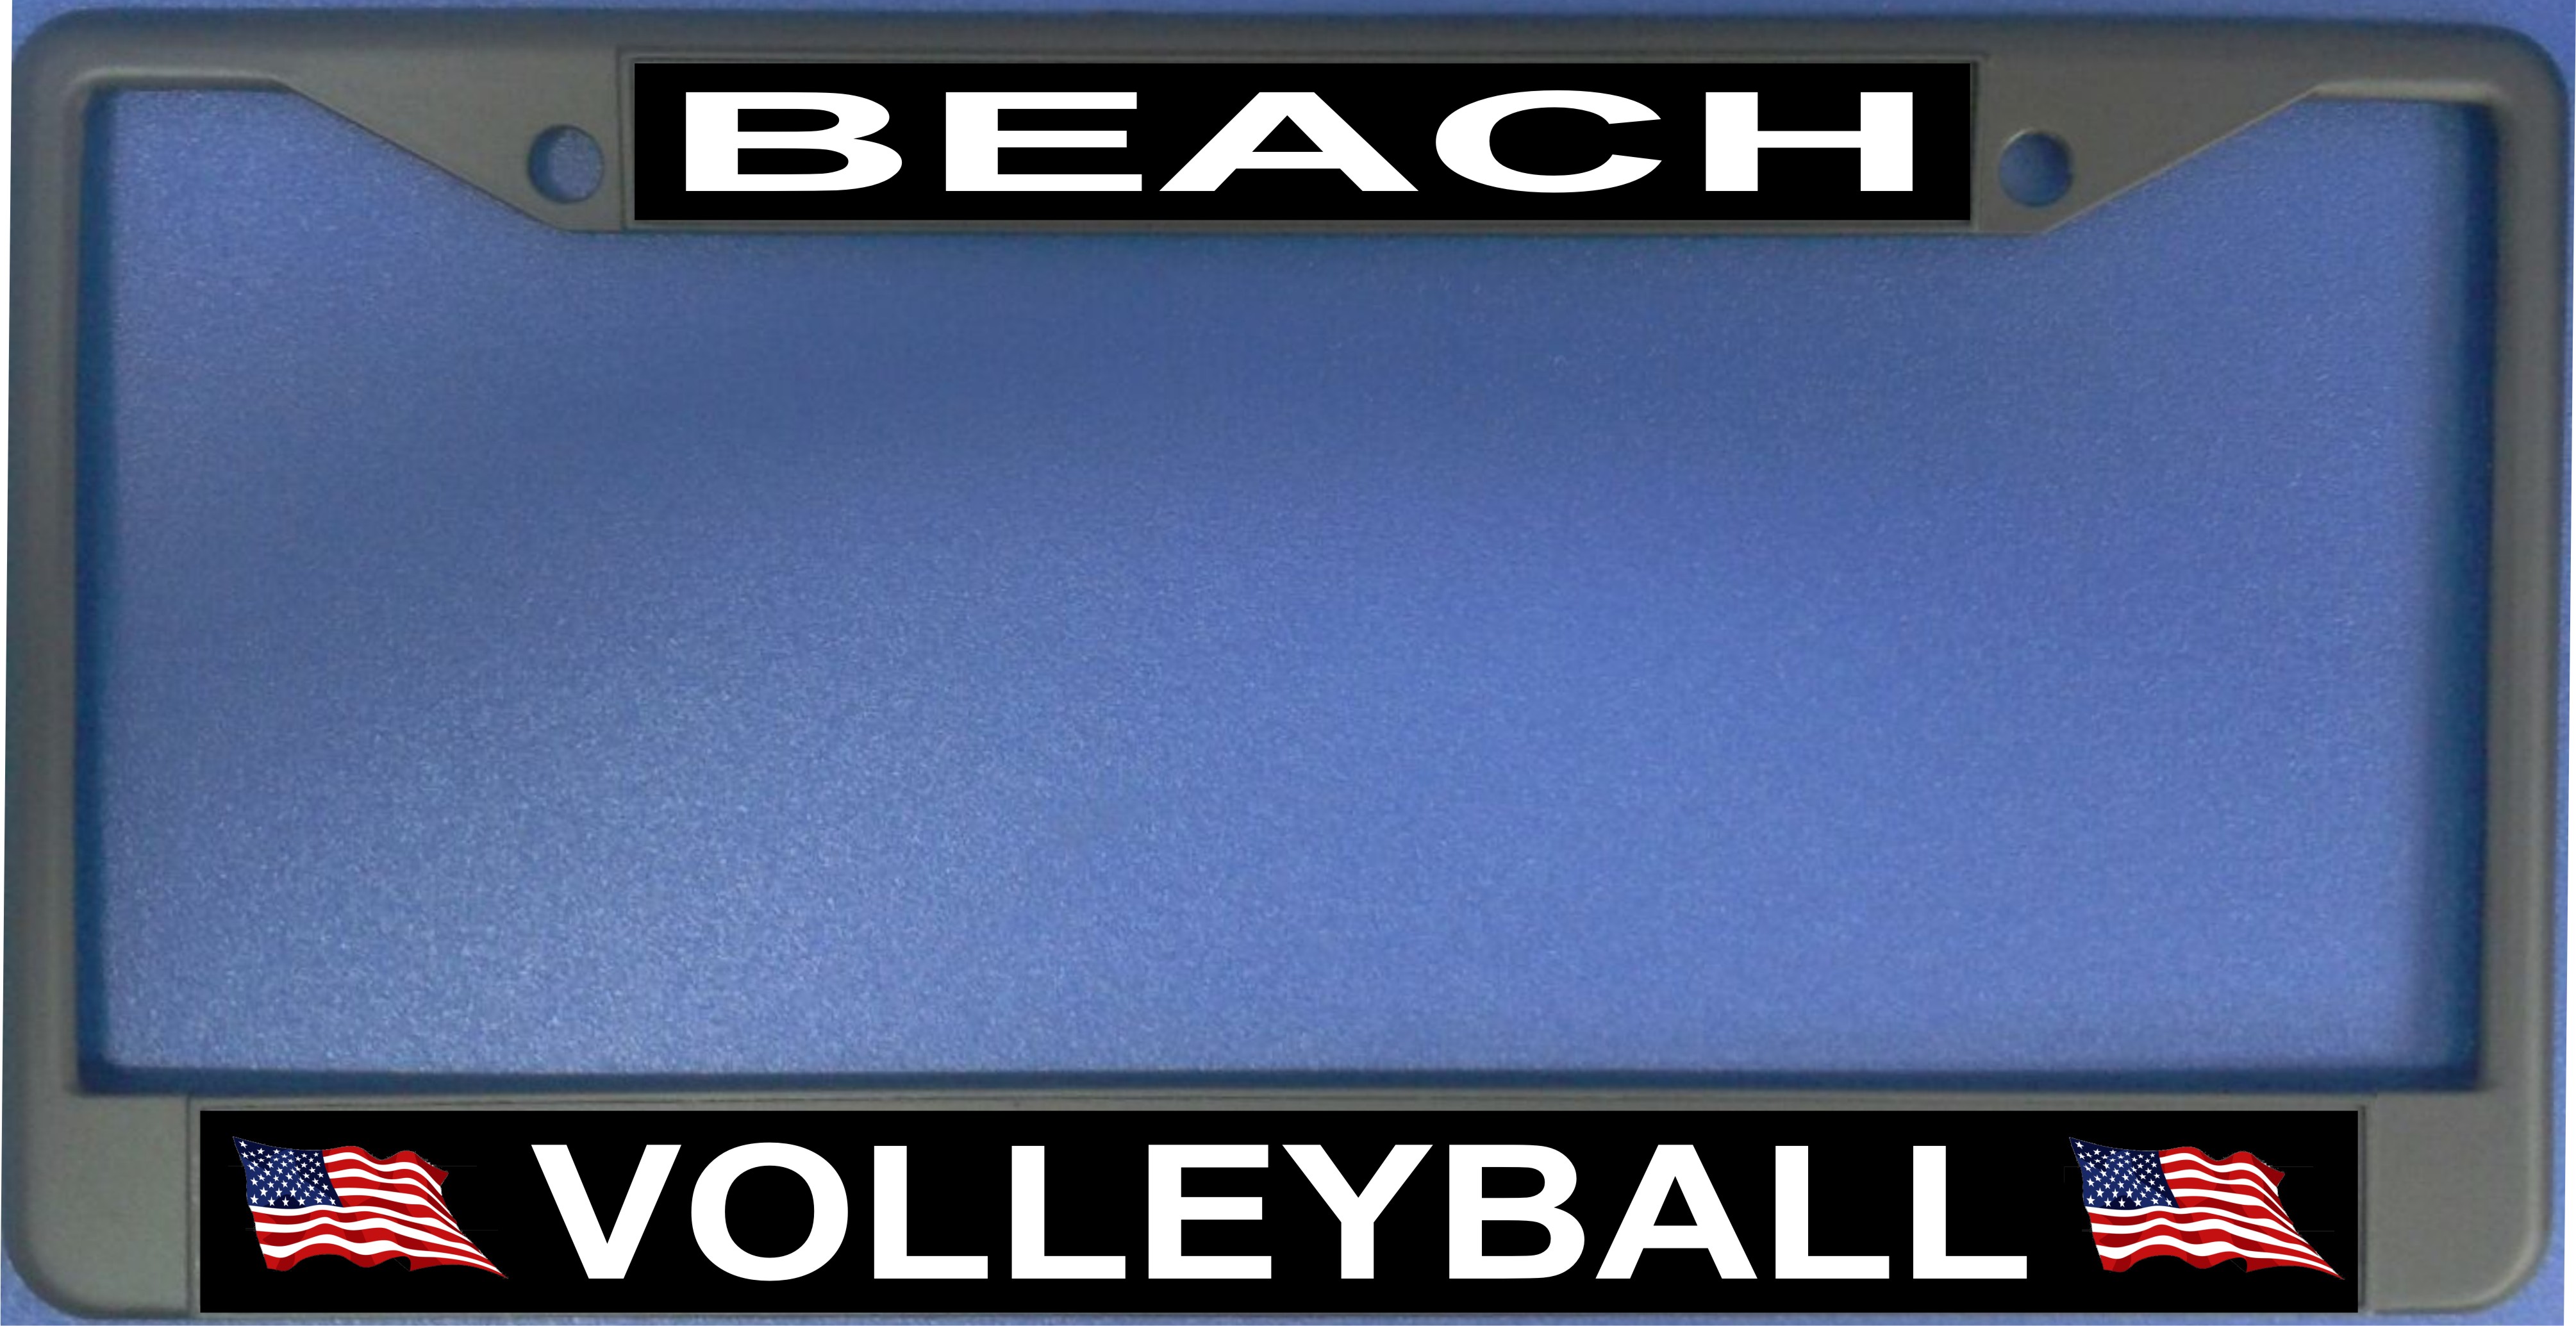 Beach VOLLEYBALL Photo License Plate Frame  Free Screw Caps with this Frame